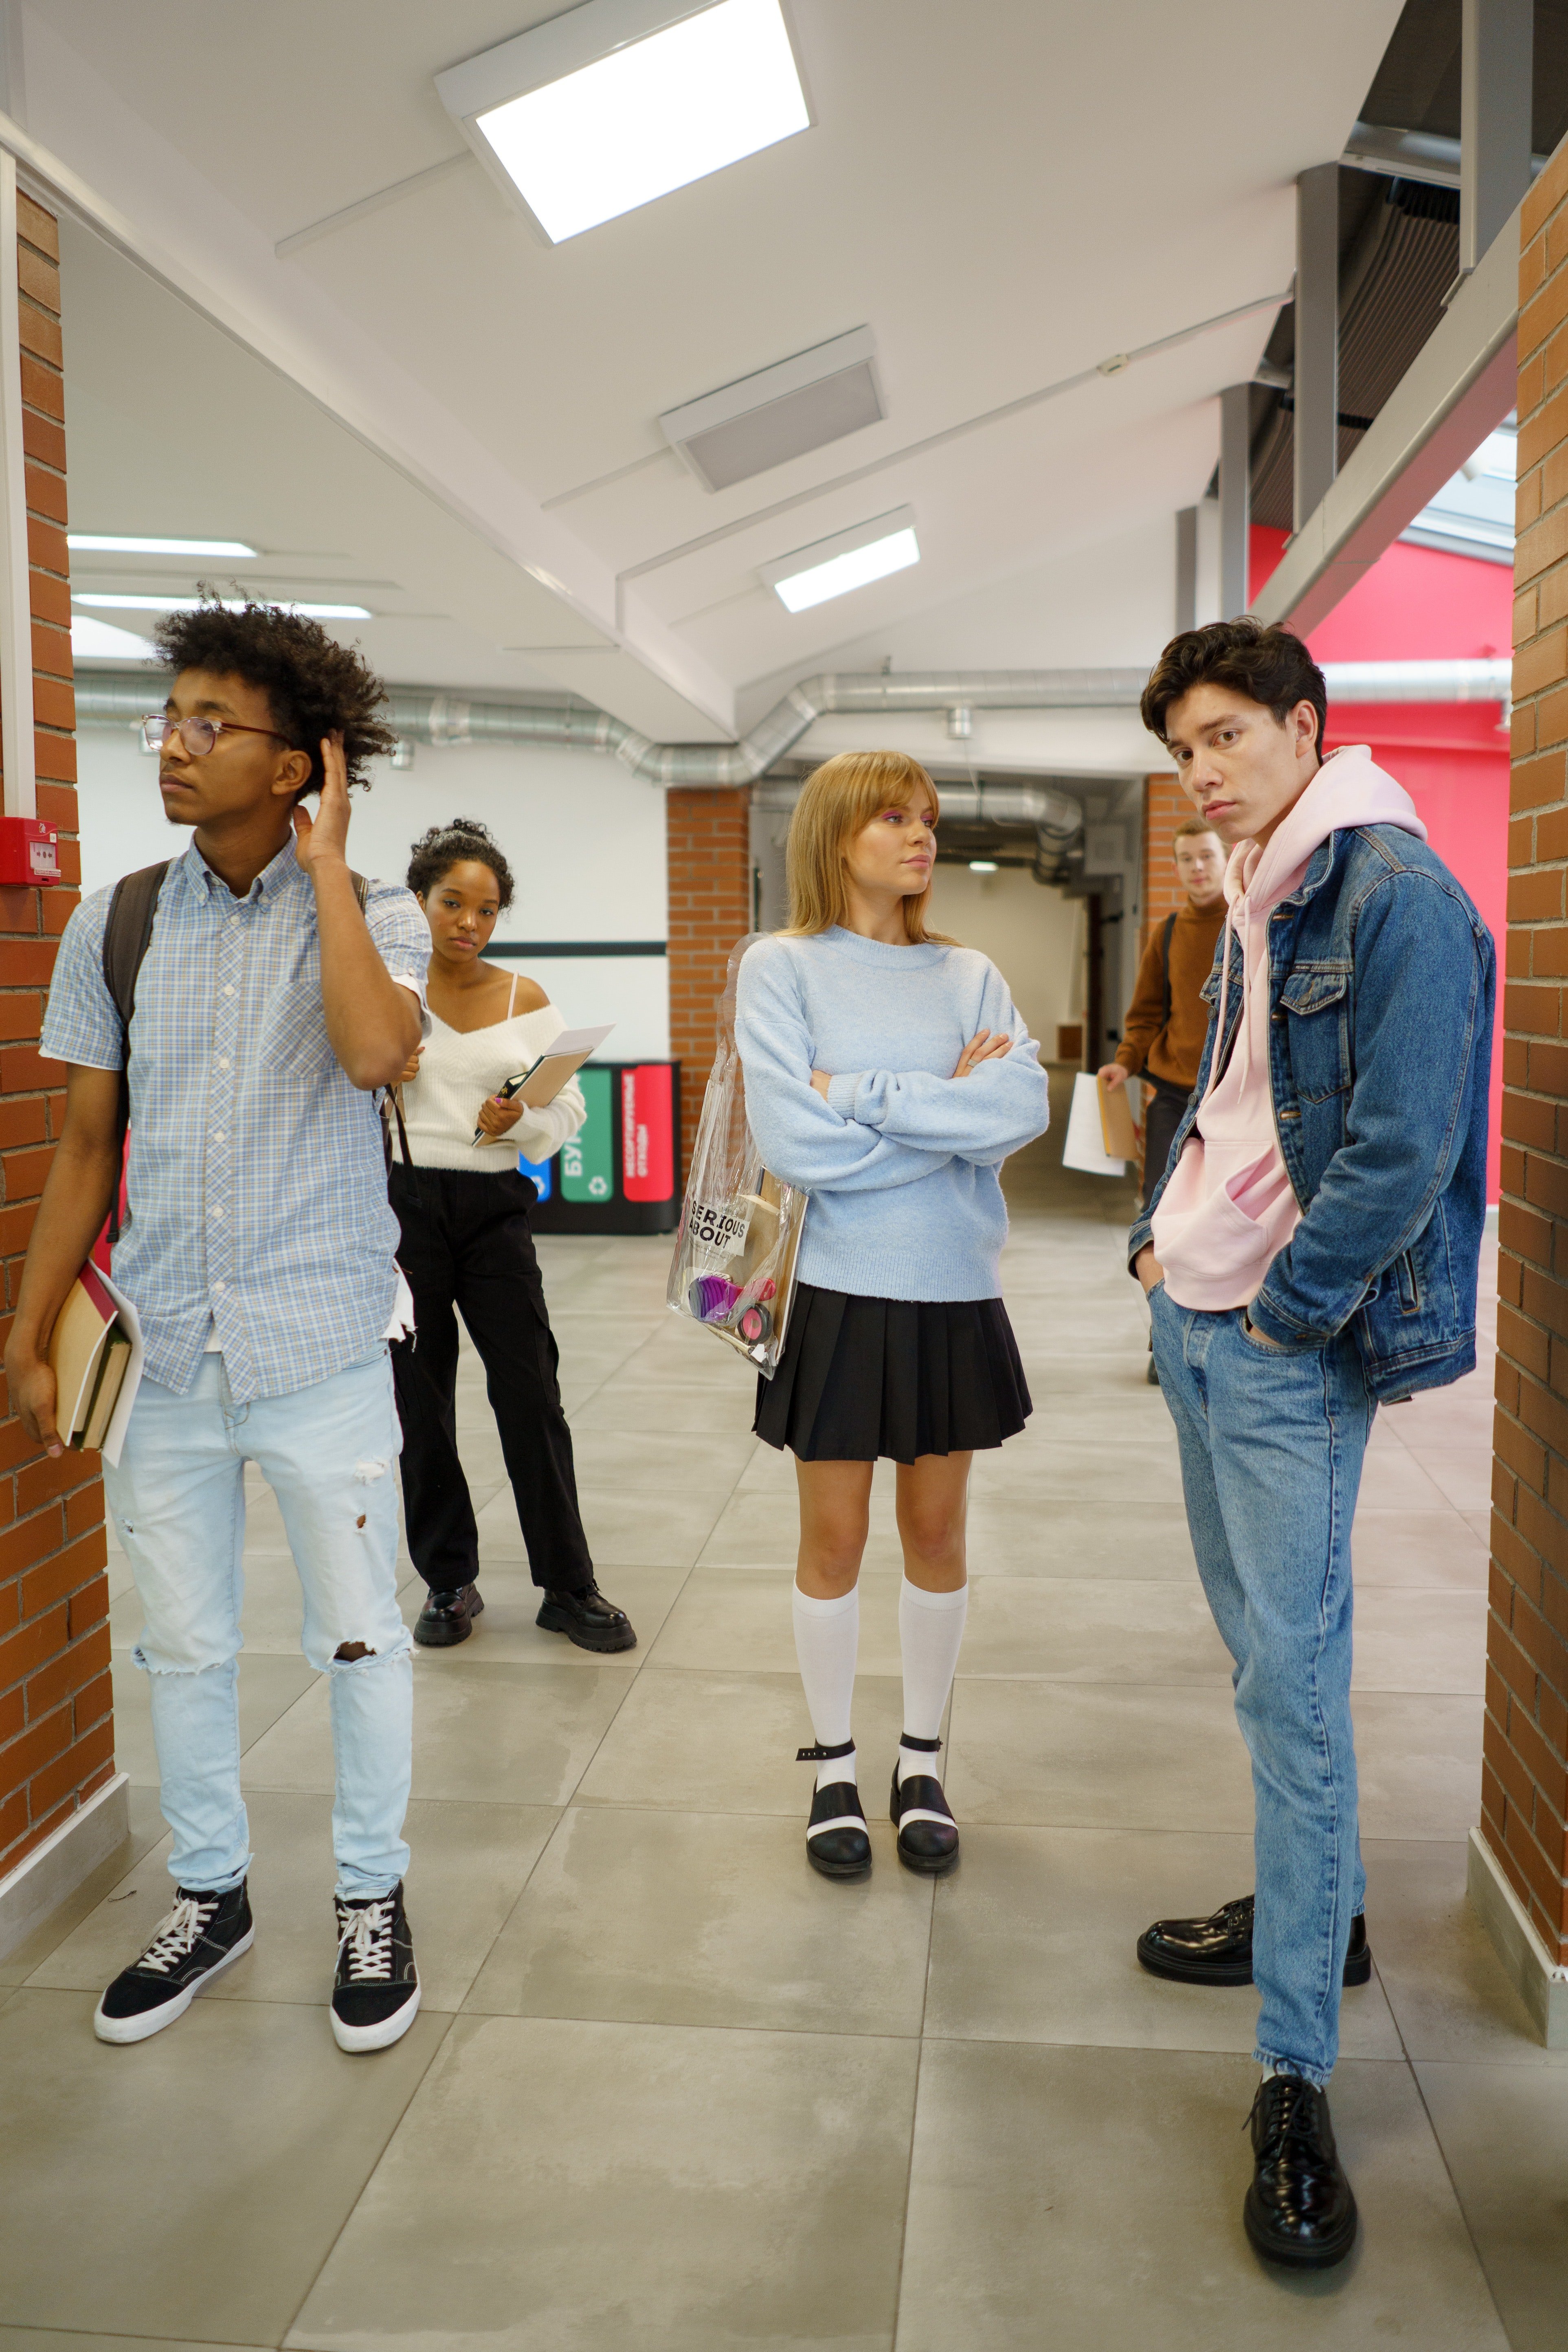 A couple of students standing in the hallway | Photo: Pexels